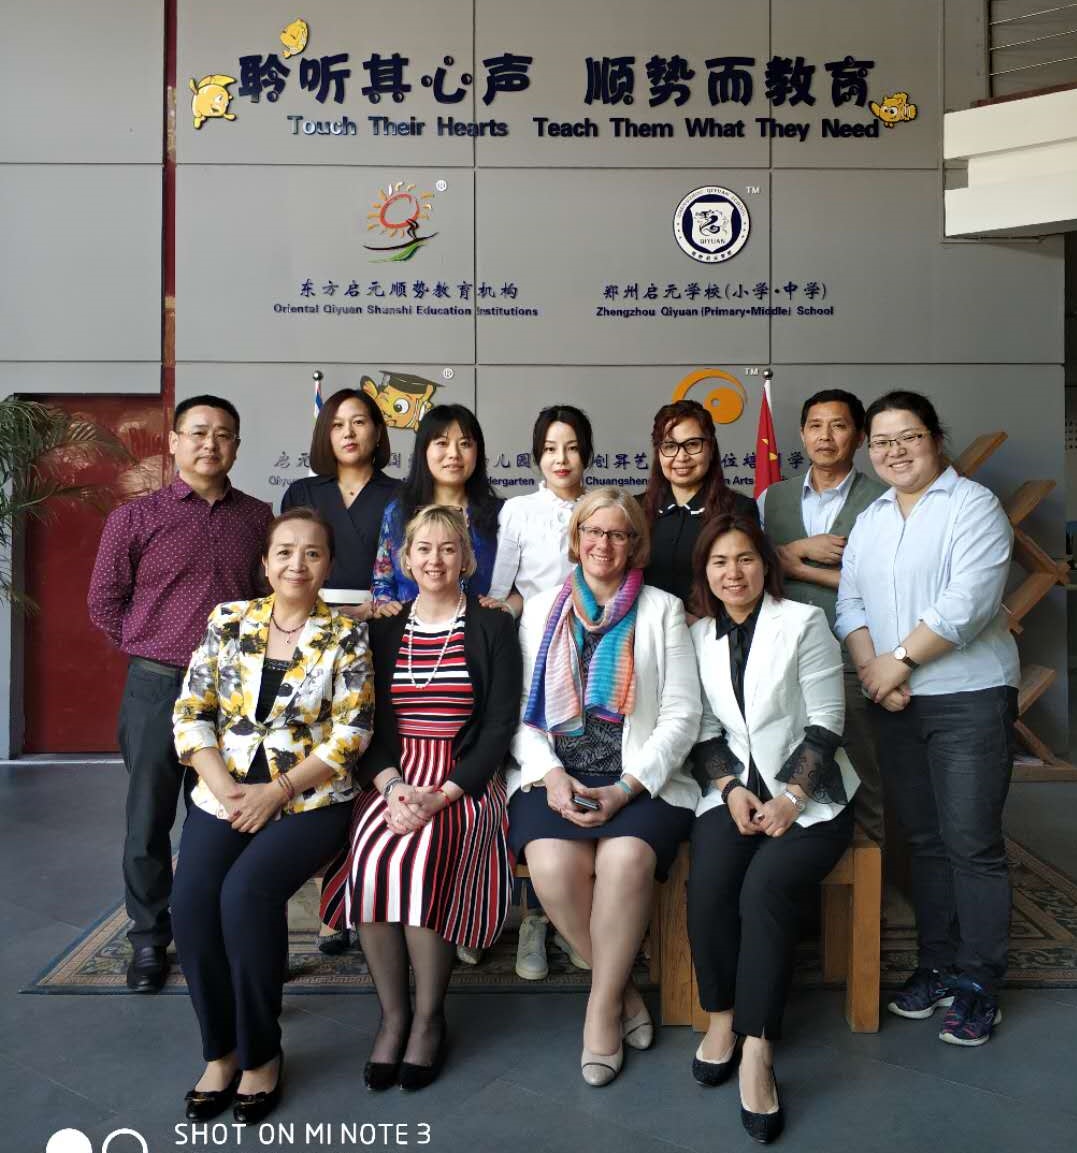 Experts from famous British universities visited Qiyuan Education